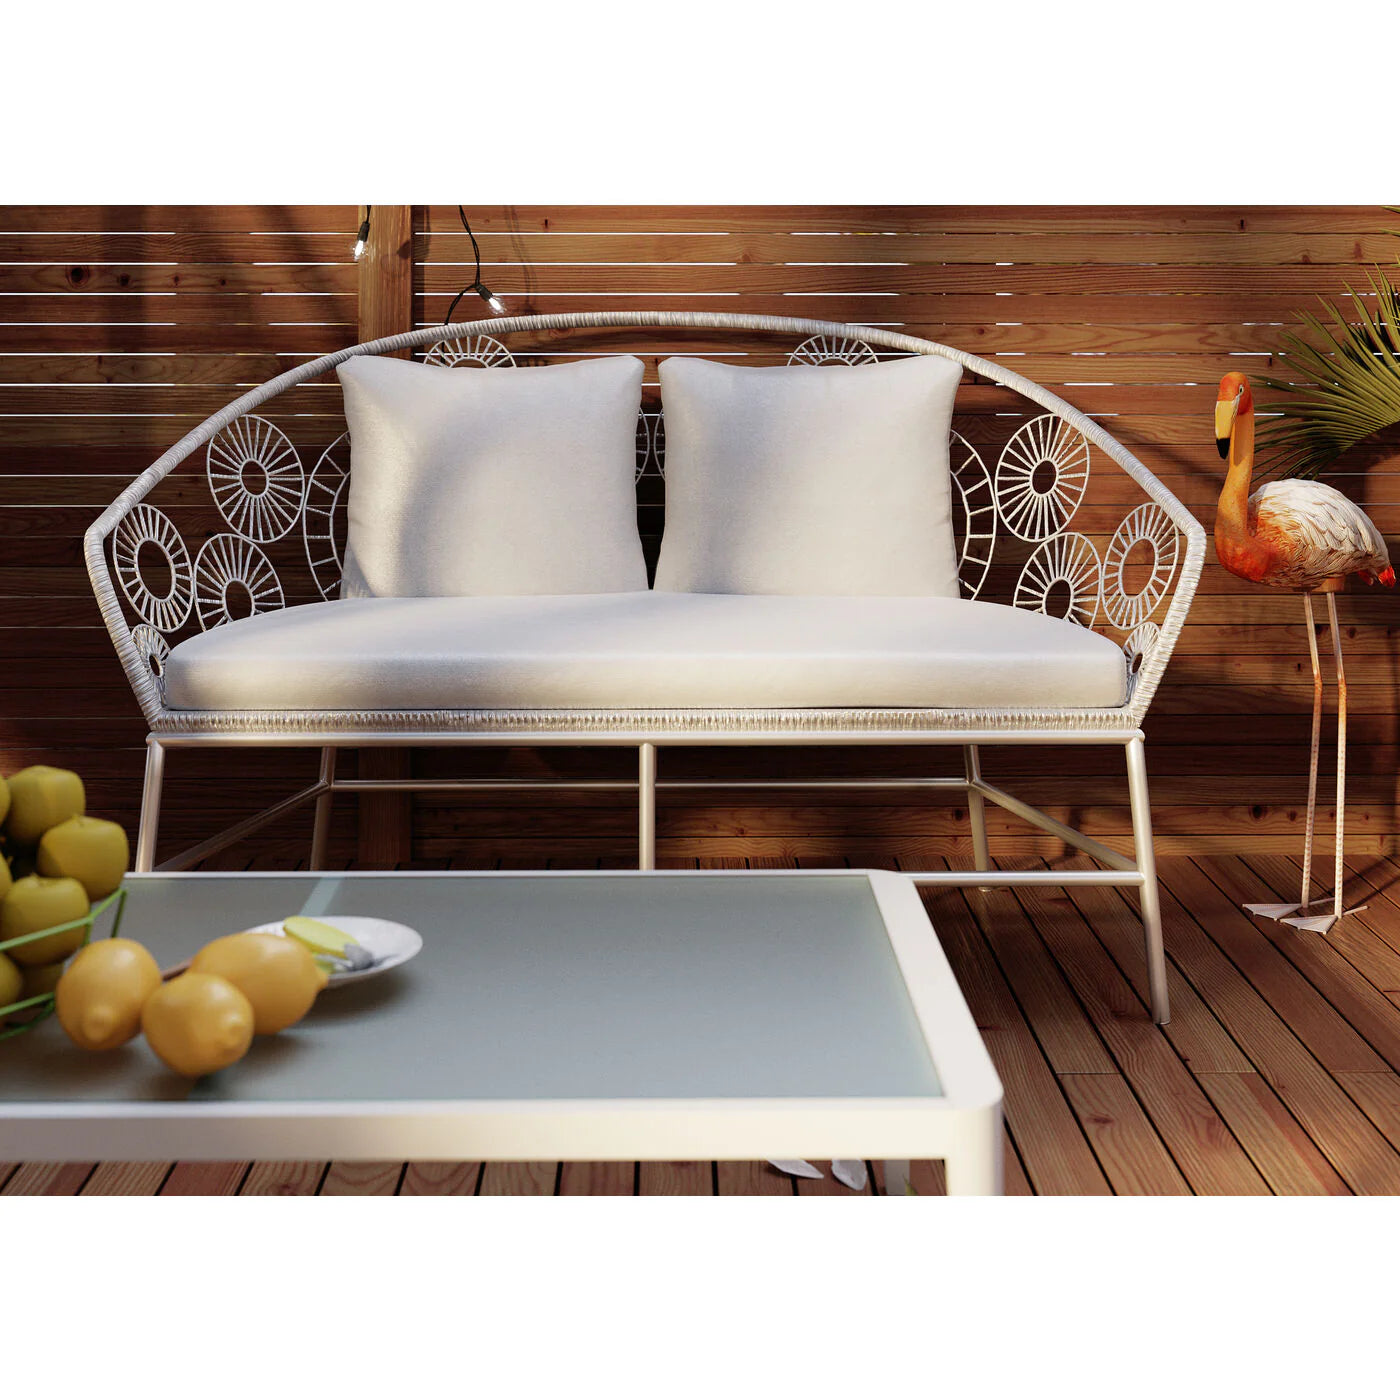 OUTDOOR SOFA SET 2 SEATER, 1 SINGLE SEATER AND 1 CENTER TABLE